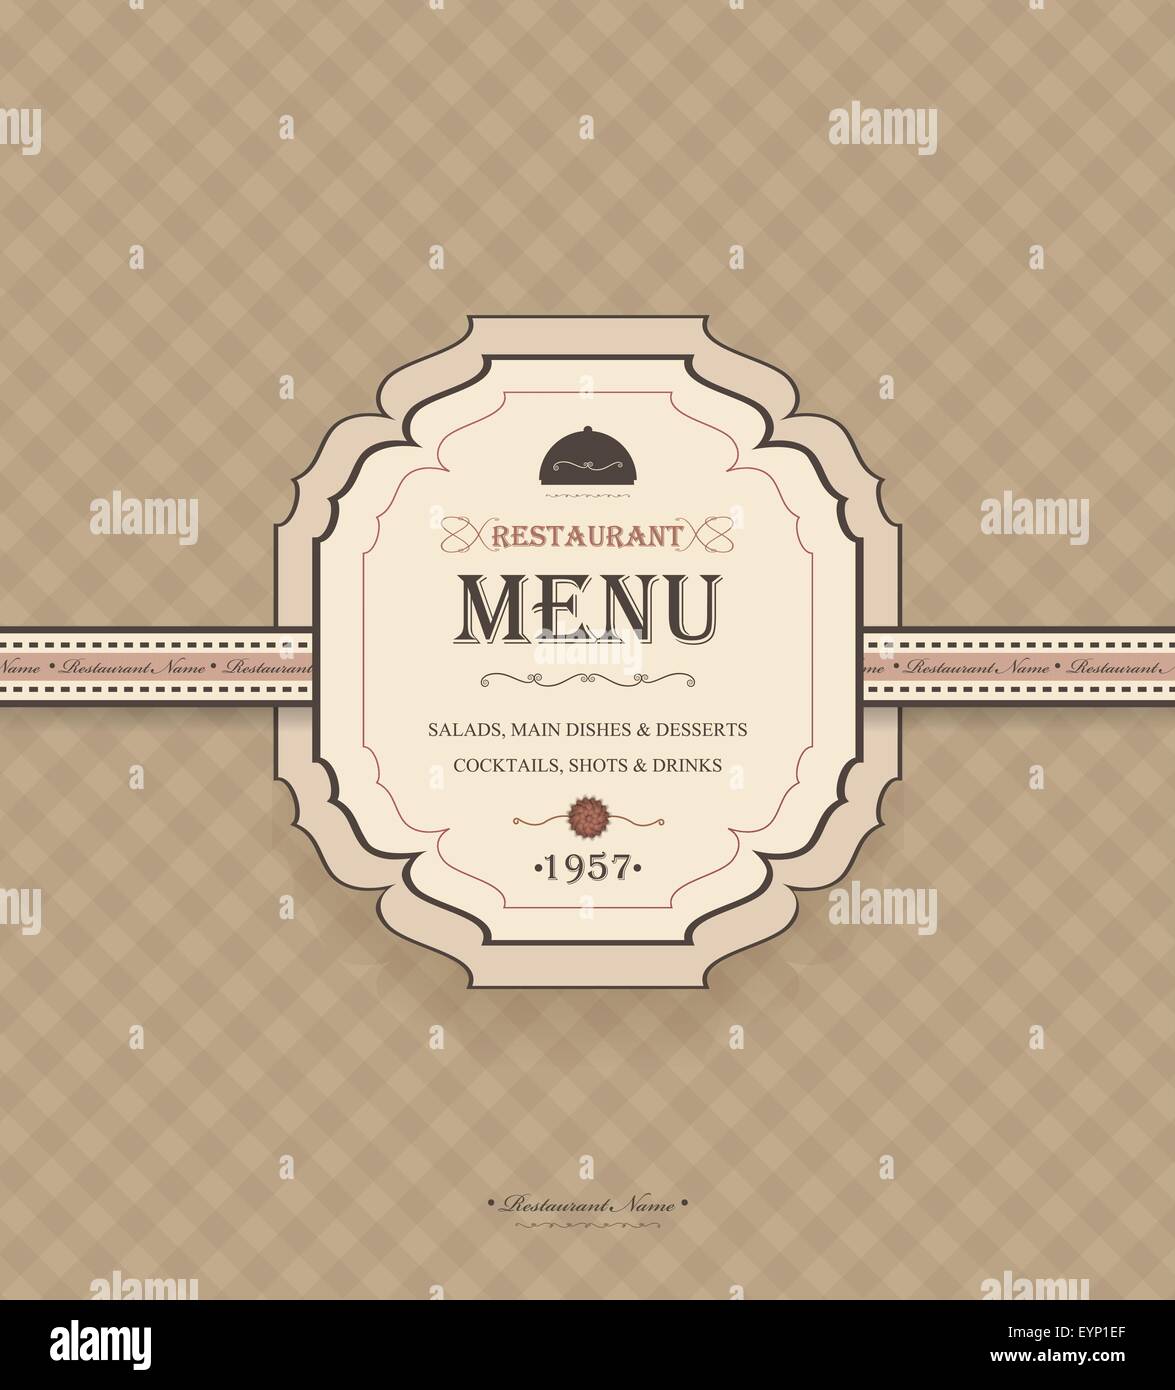 Vintage Restaurant Menu With Checkered Background And Title Inscription Stock Vector